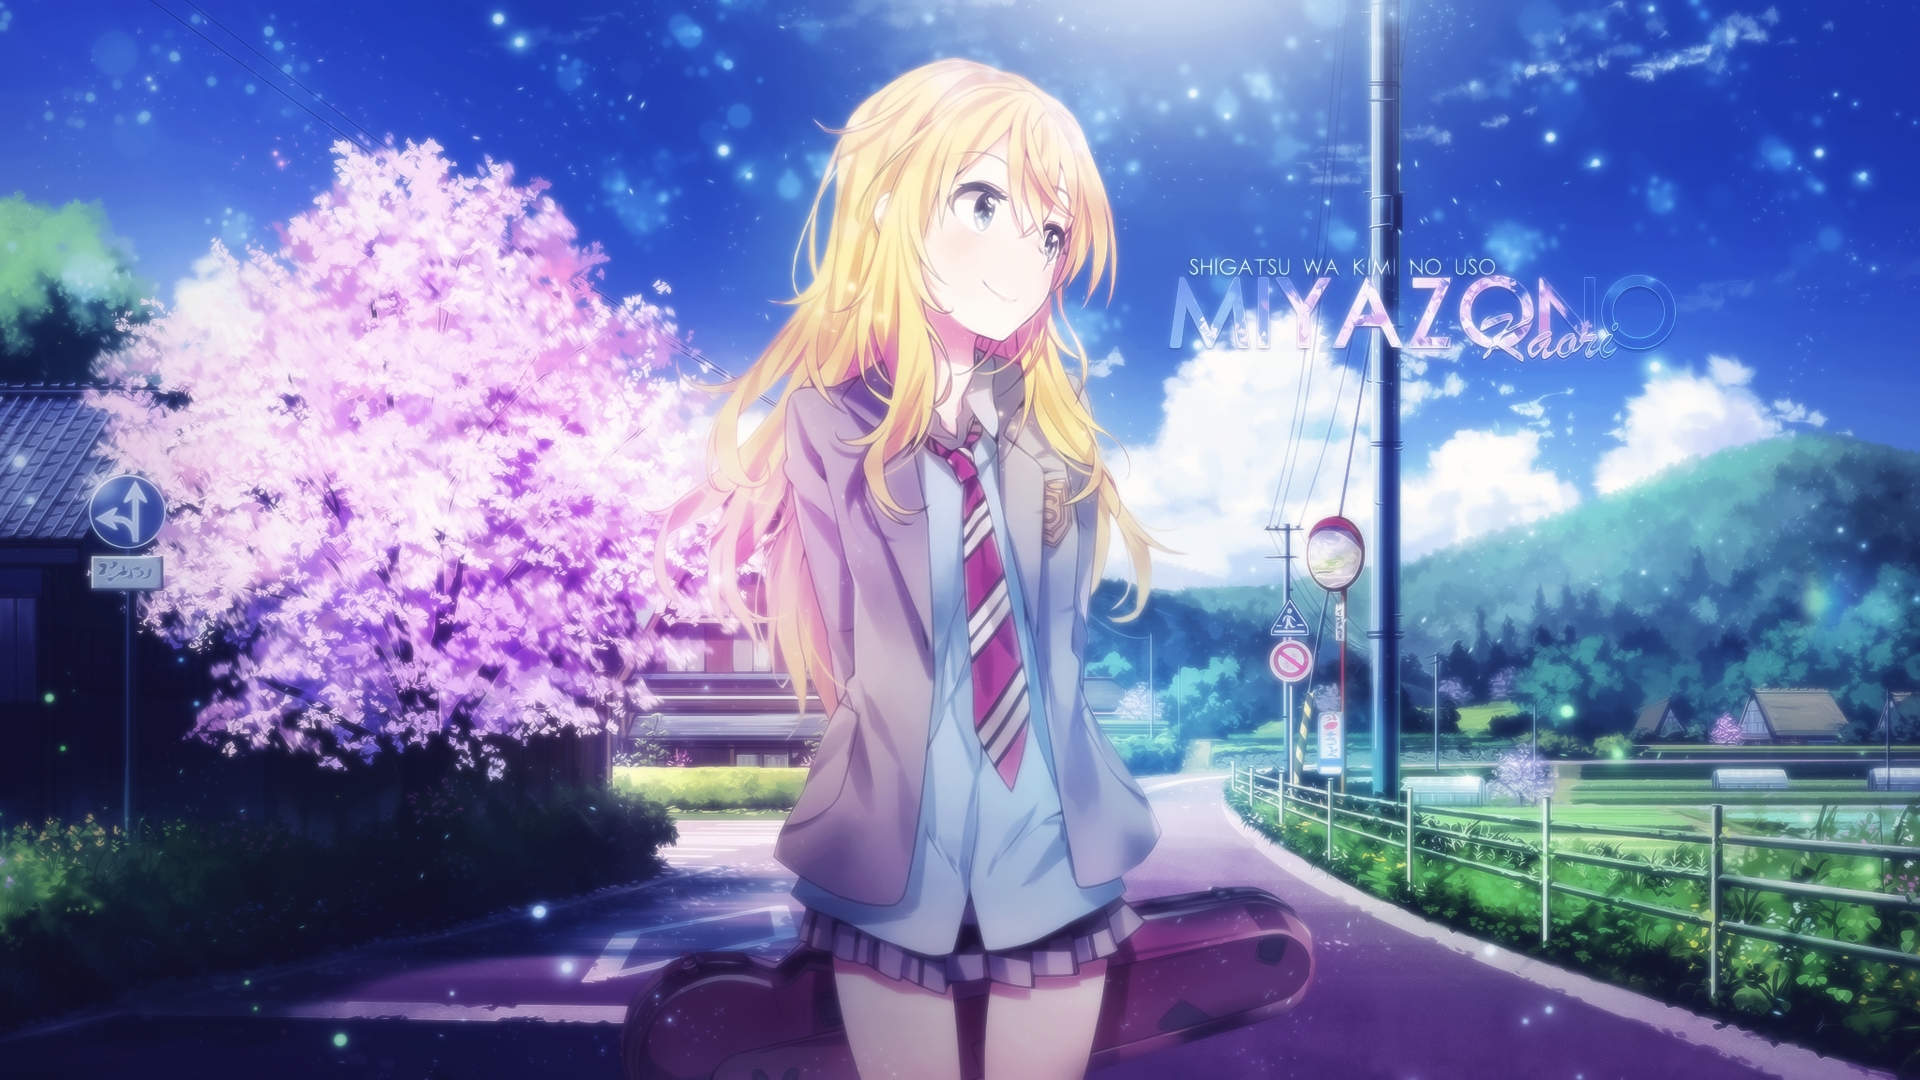 10 Most Popular Your Lie In April Kaori Wallpaper FULL HD 1080p For PC Background